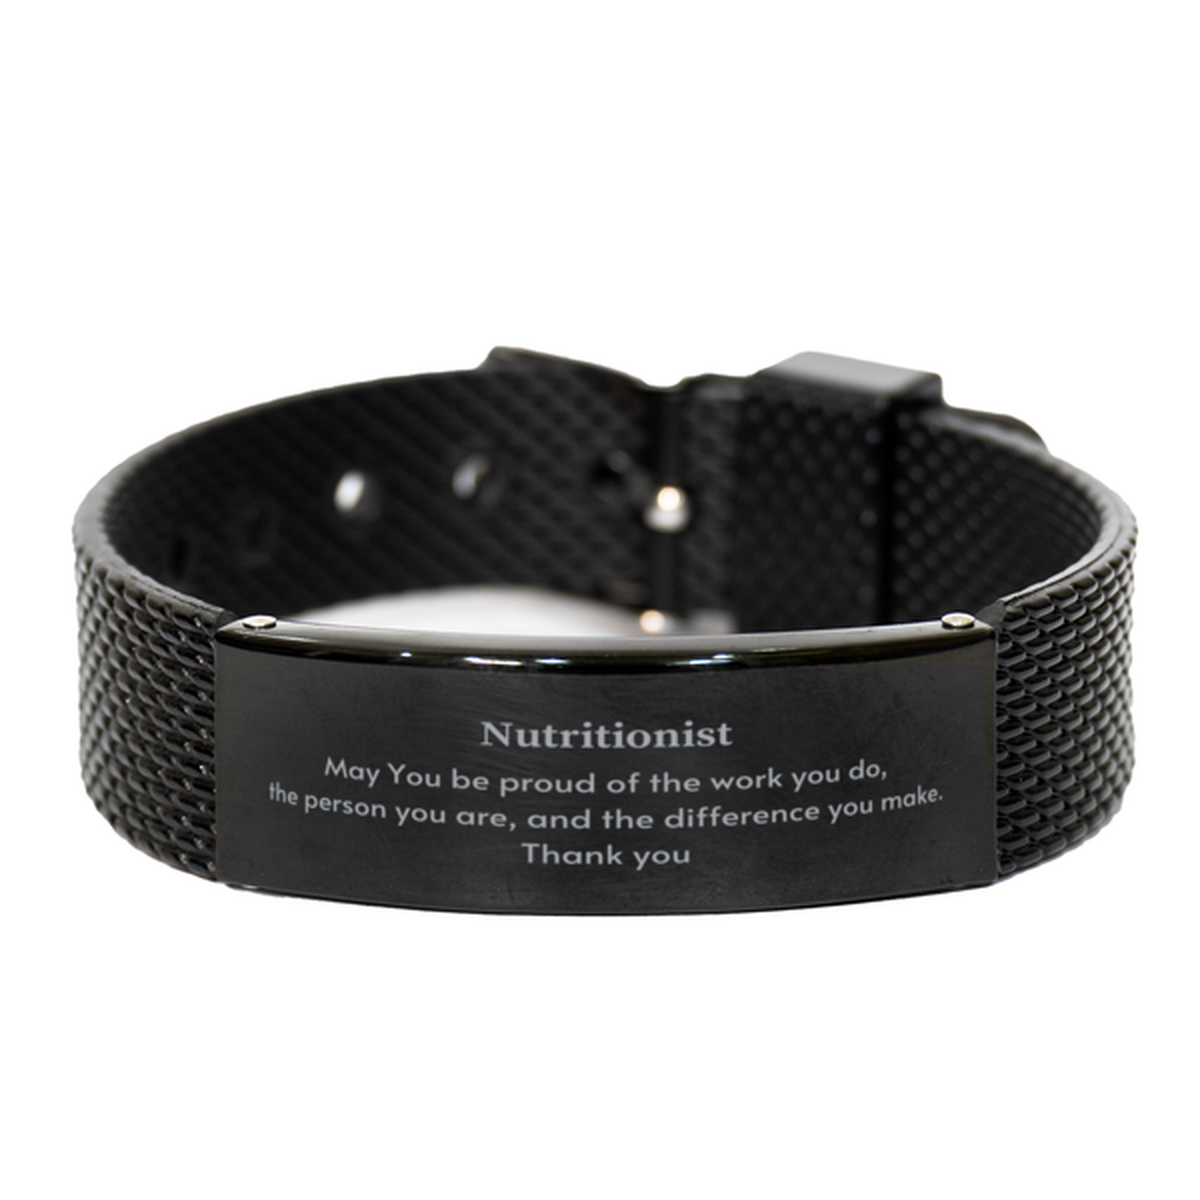 Heartwarming Black Shark Mesh Bracelet Retirement Coworkers Gifts for Nutritionist, Nutritionist May You be proud of the work you do, the person you are Gifts for Boss Men Women Friends